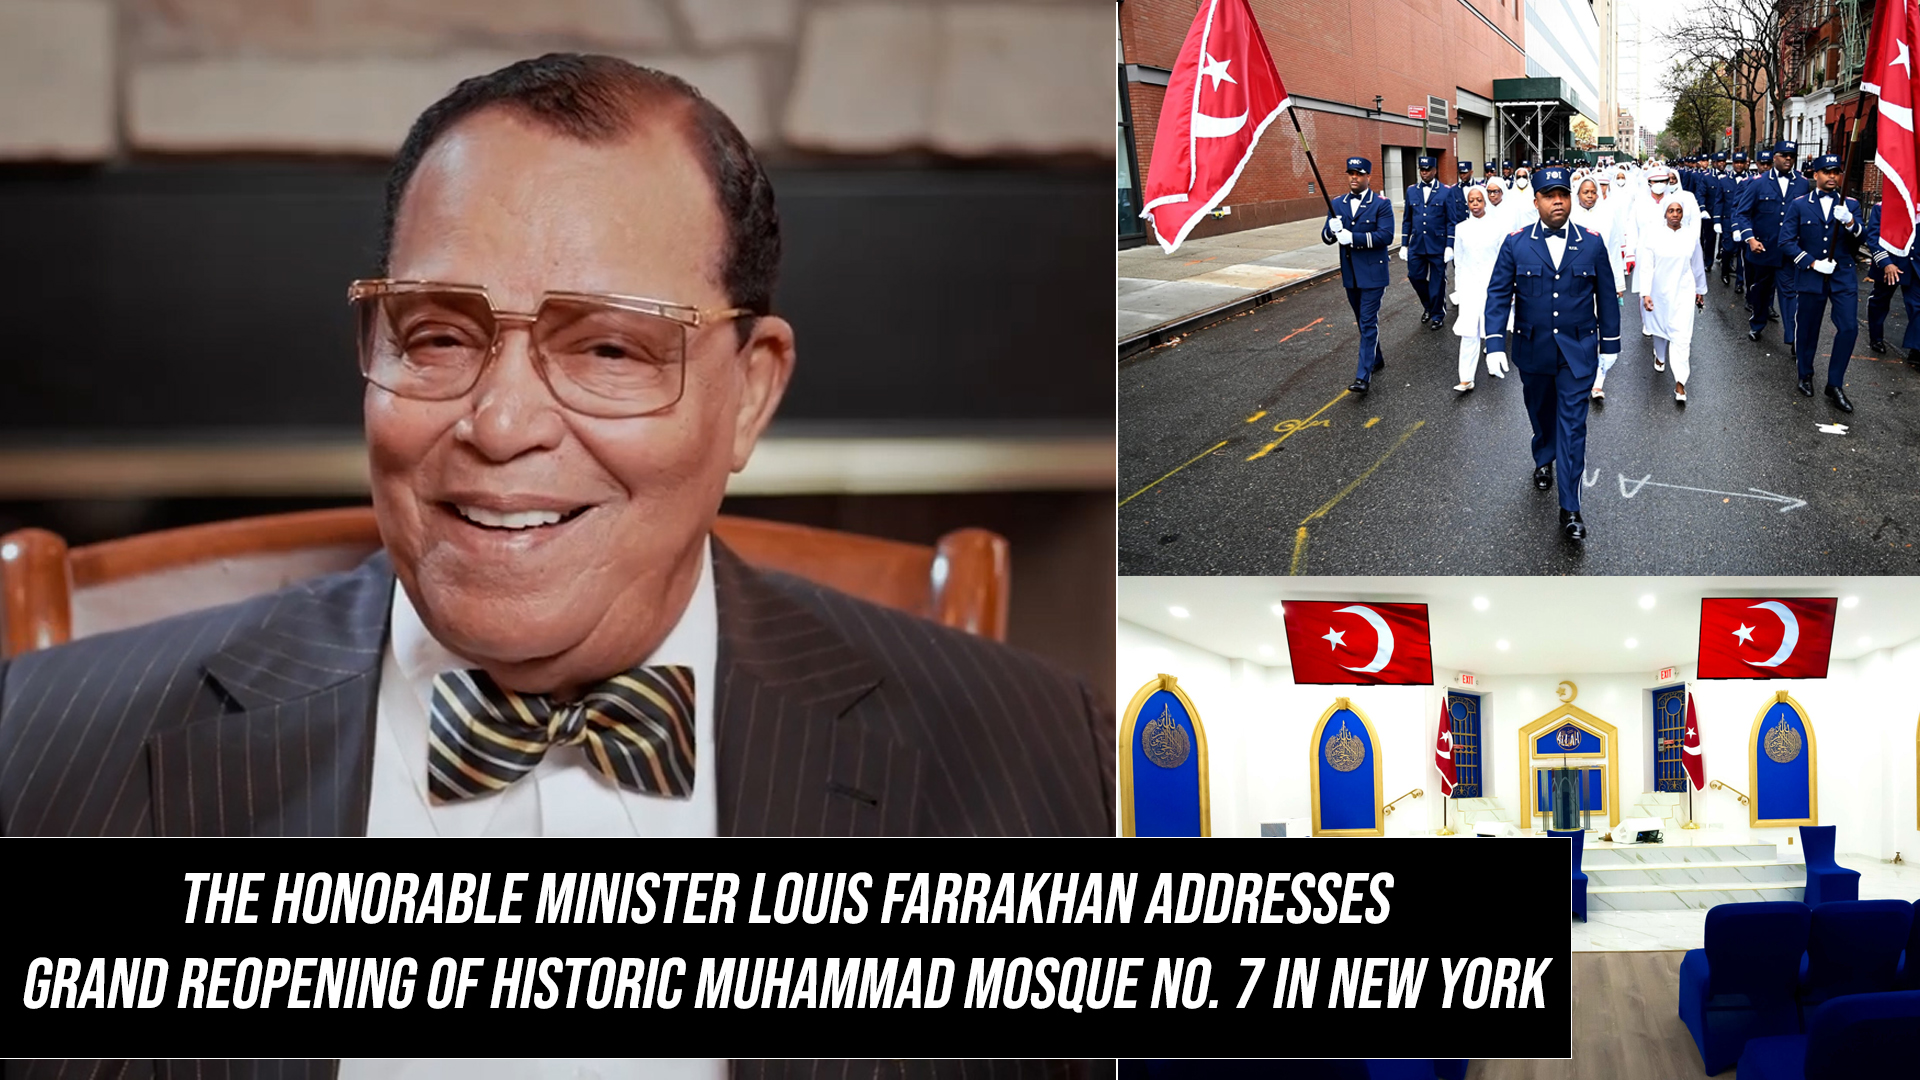 Minister Farrakhan Addresses Muhammad Mosque No 7 Grand Reopening